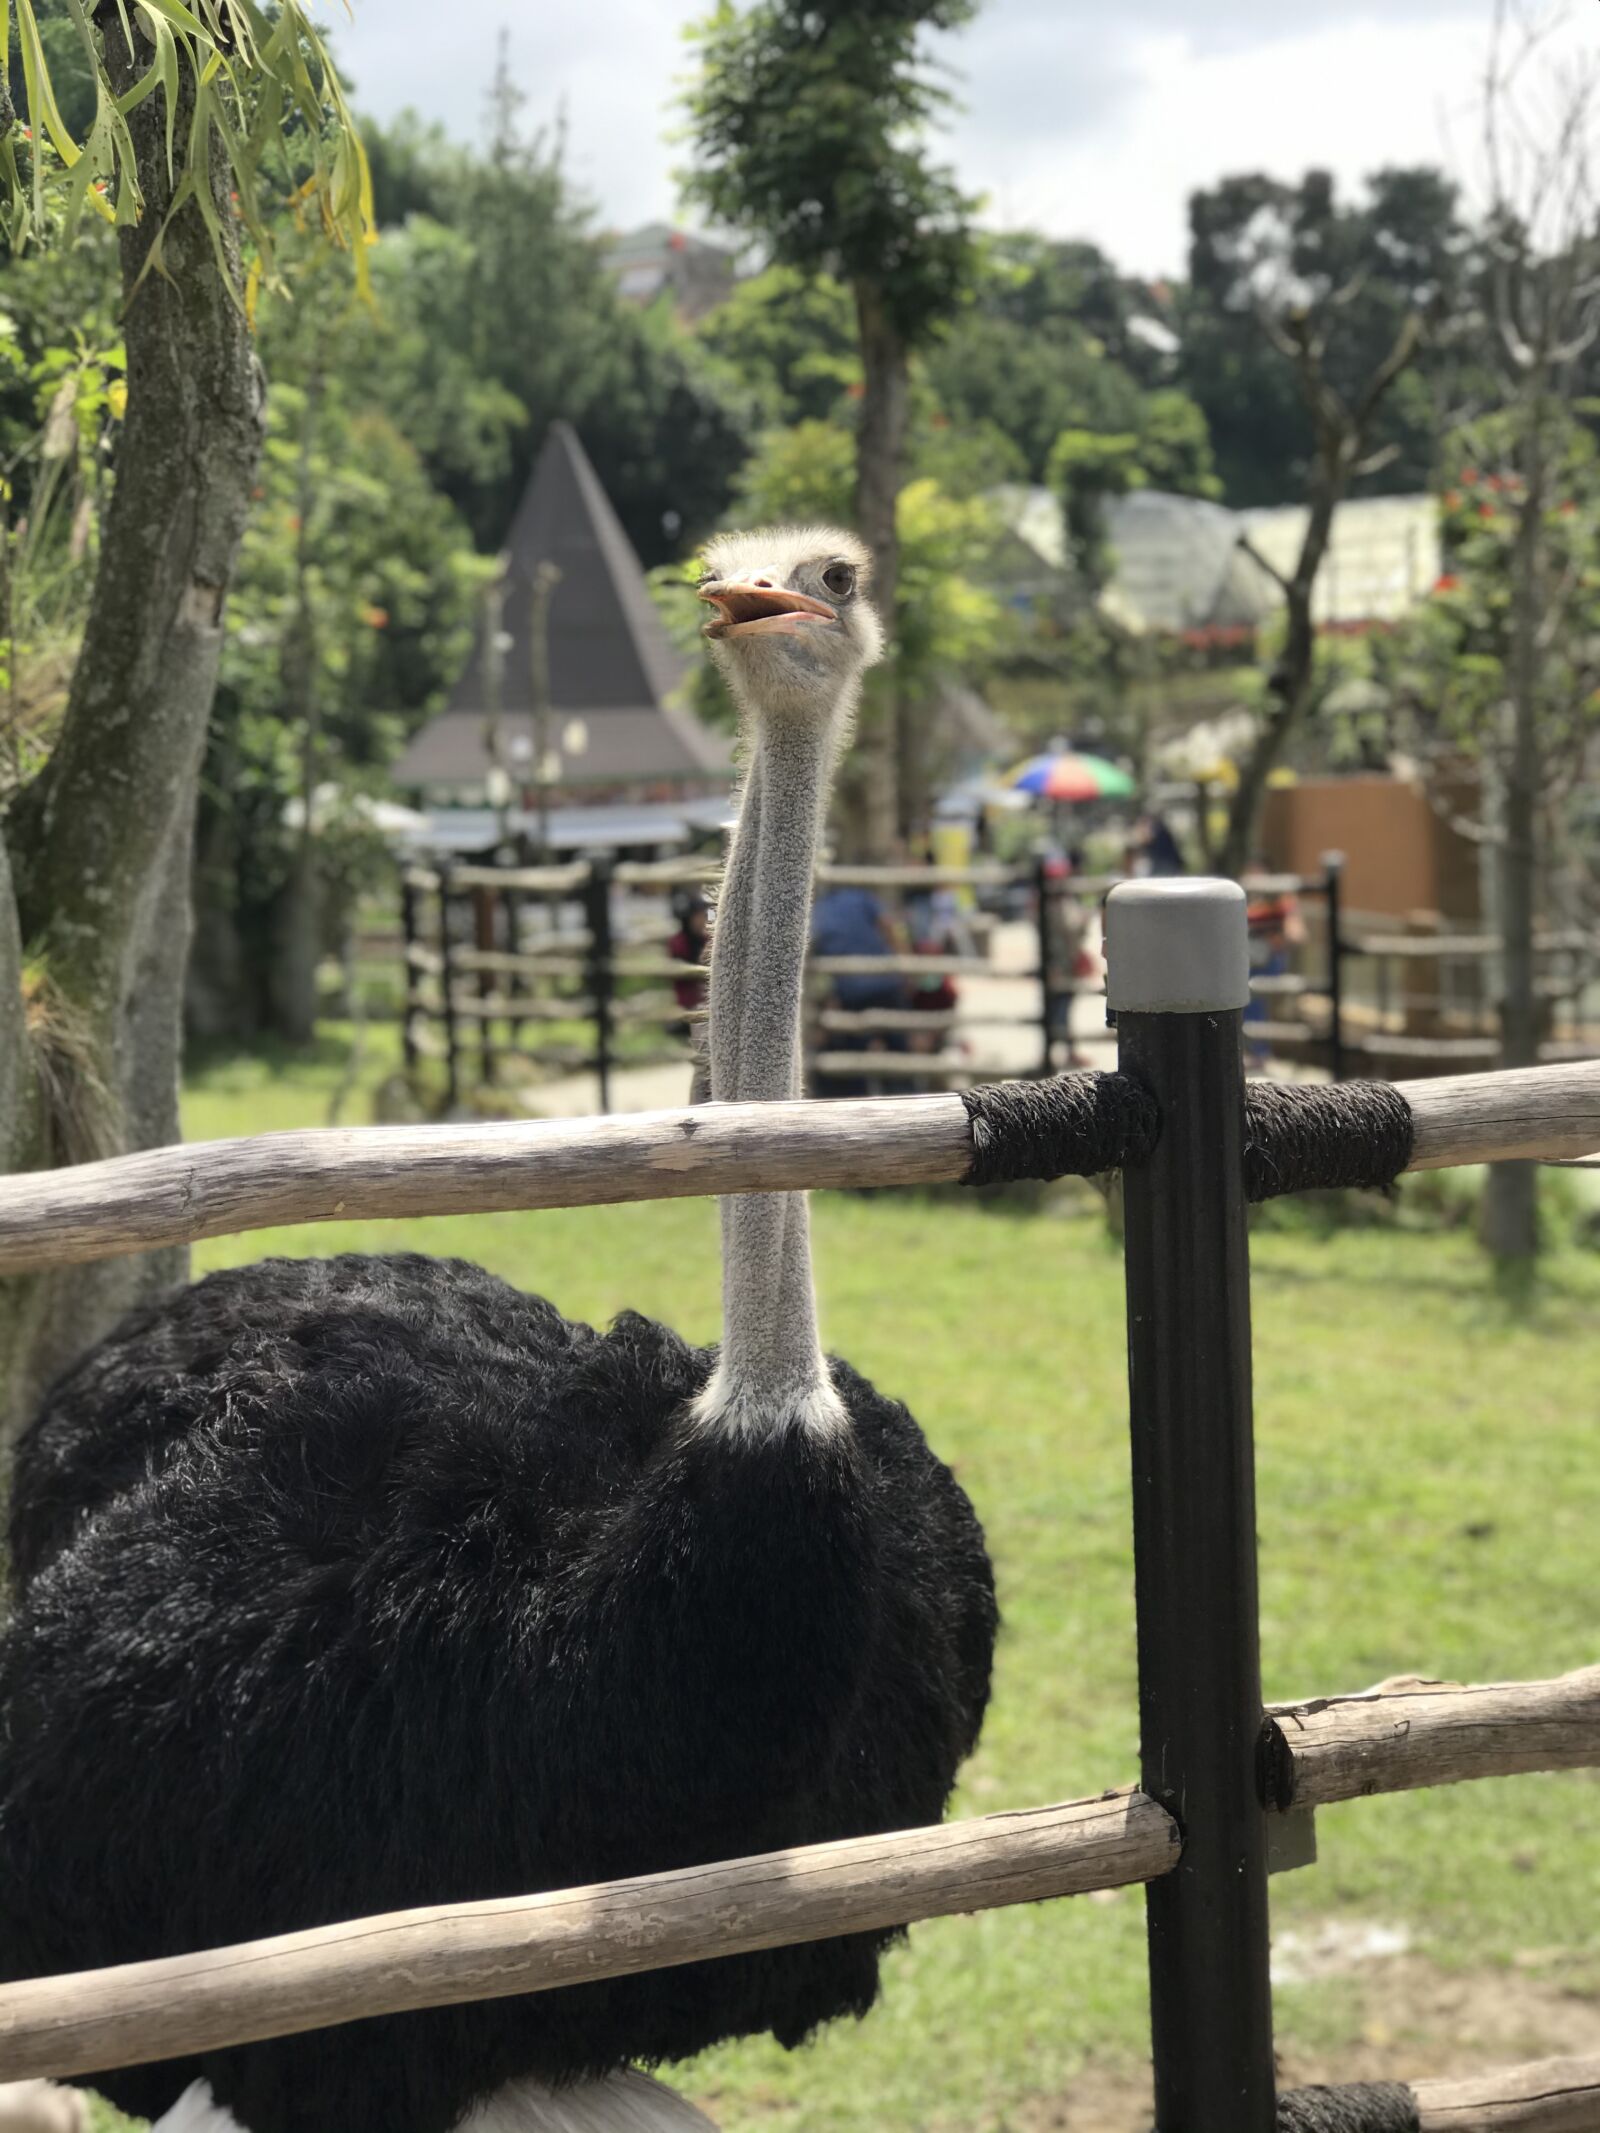 iPhone 7 Plus back dual camera 6.6mm f/2.8 sample photo. Ostrich, zoo, animal photography